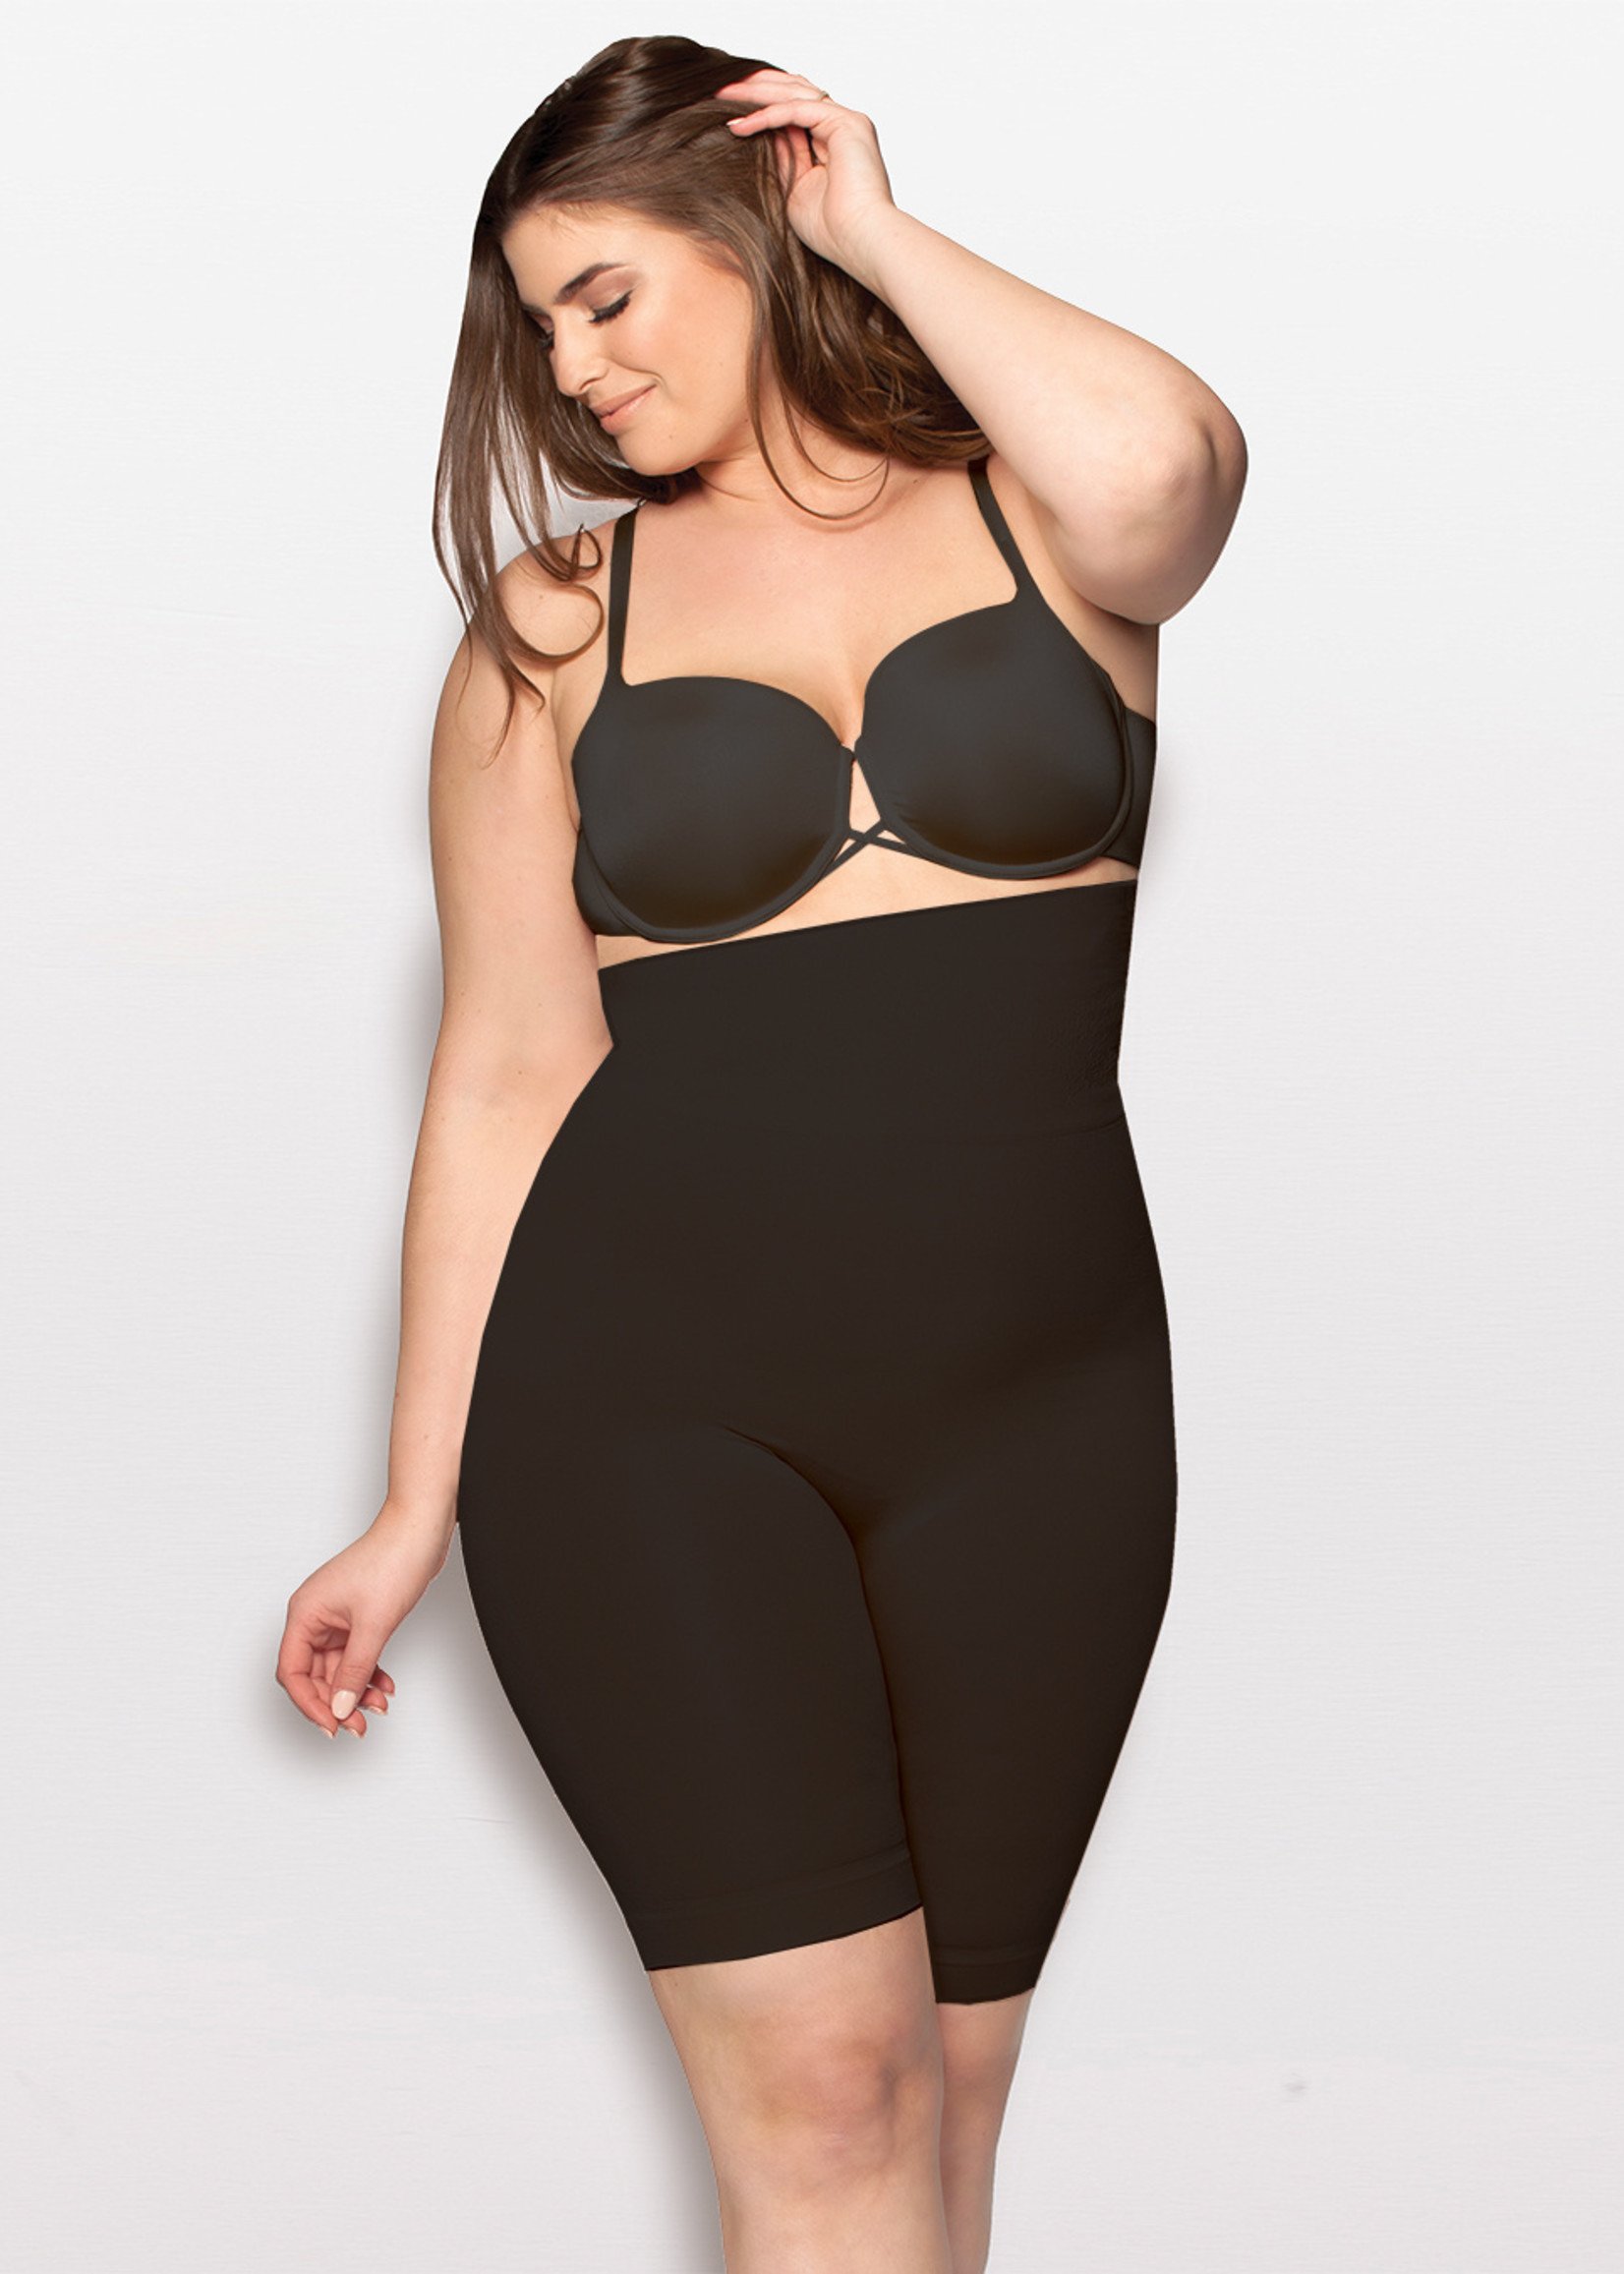 The Sculptor All In One Shapewear - Je Suis Jolie